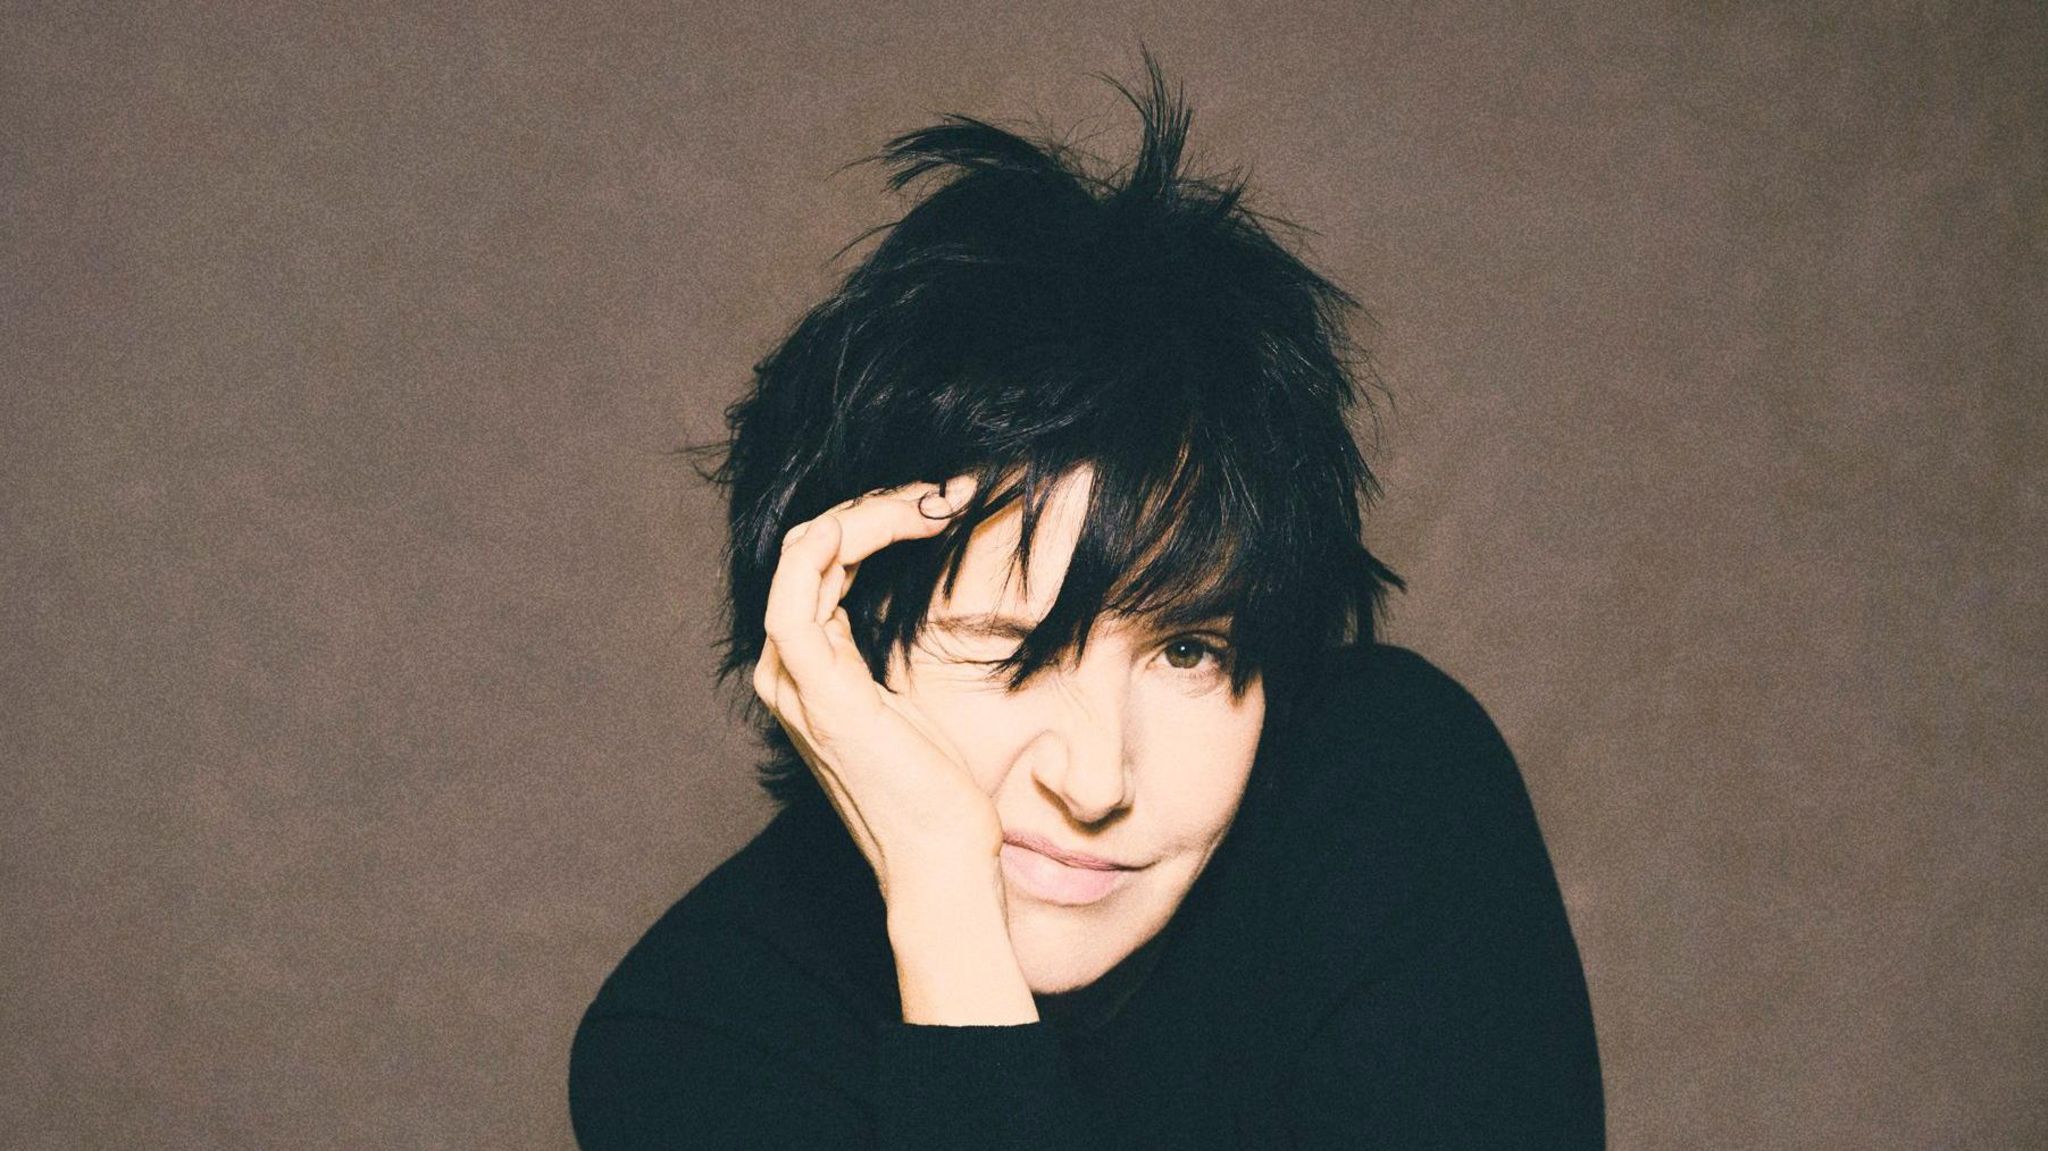 Sharleen Spiteri pictured with her hand resting on her face